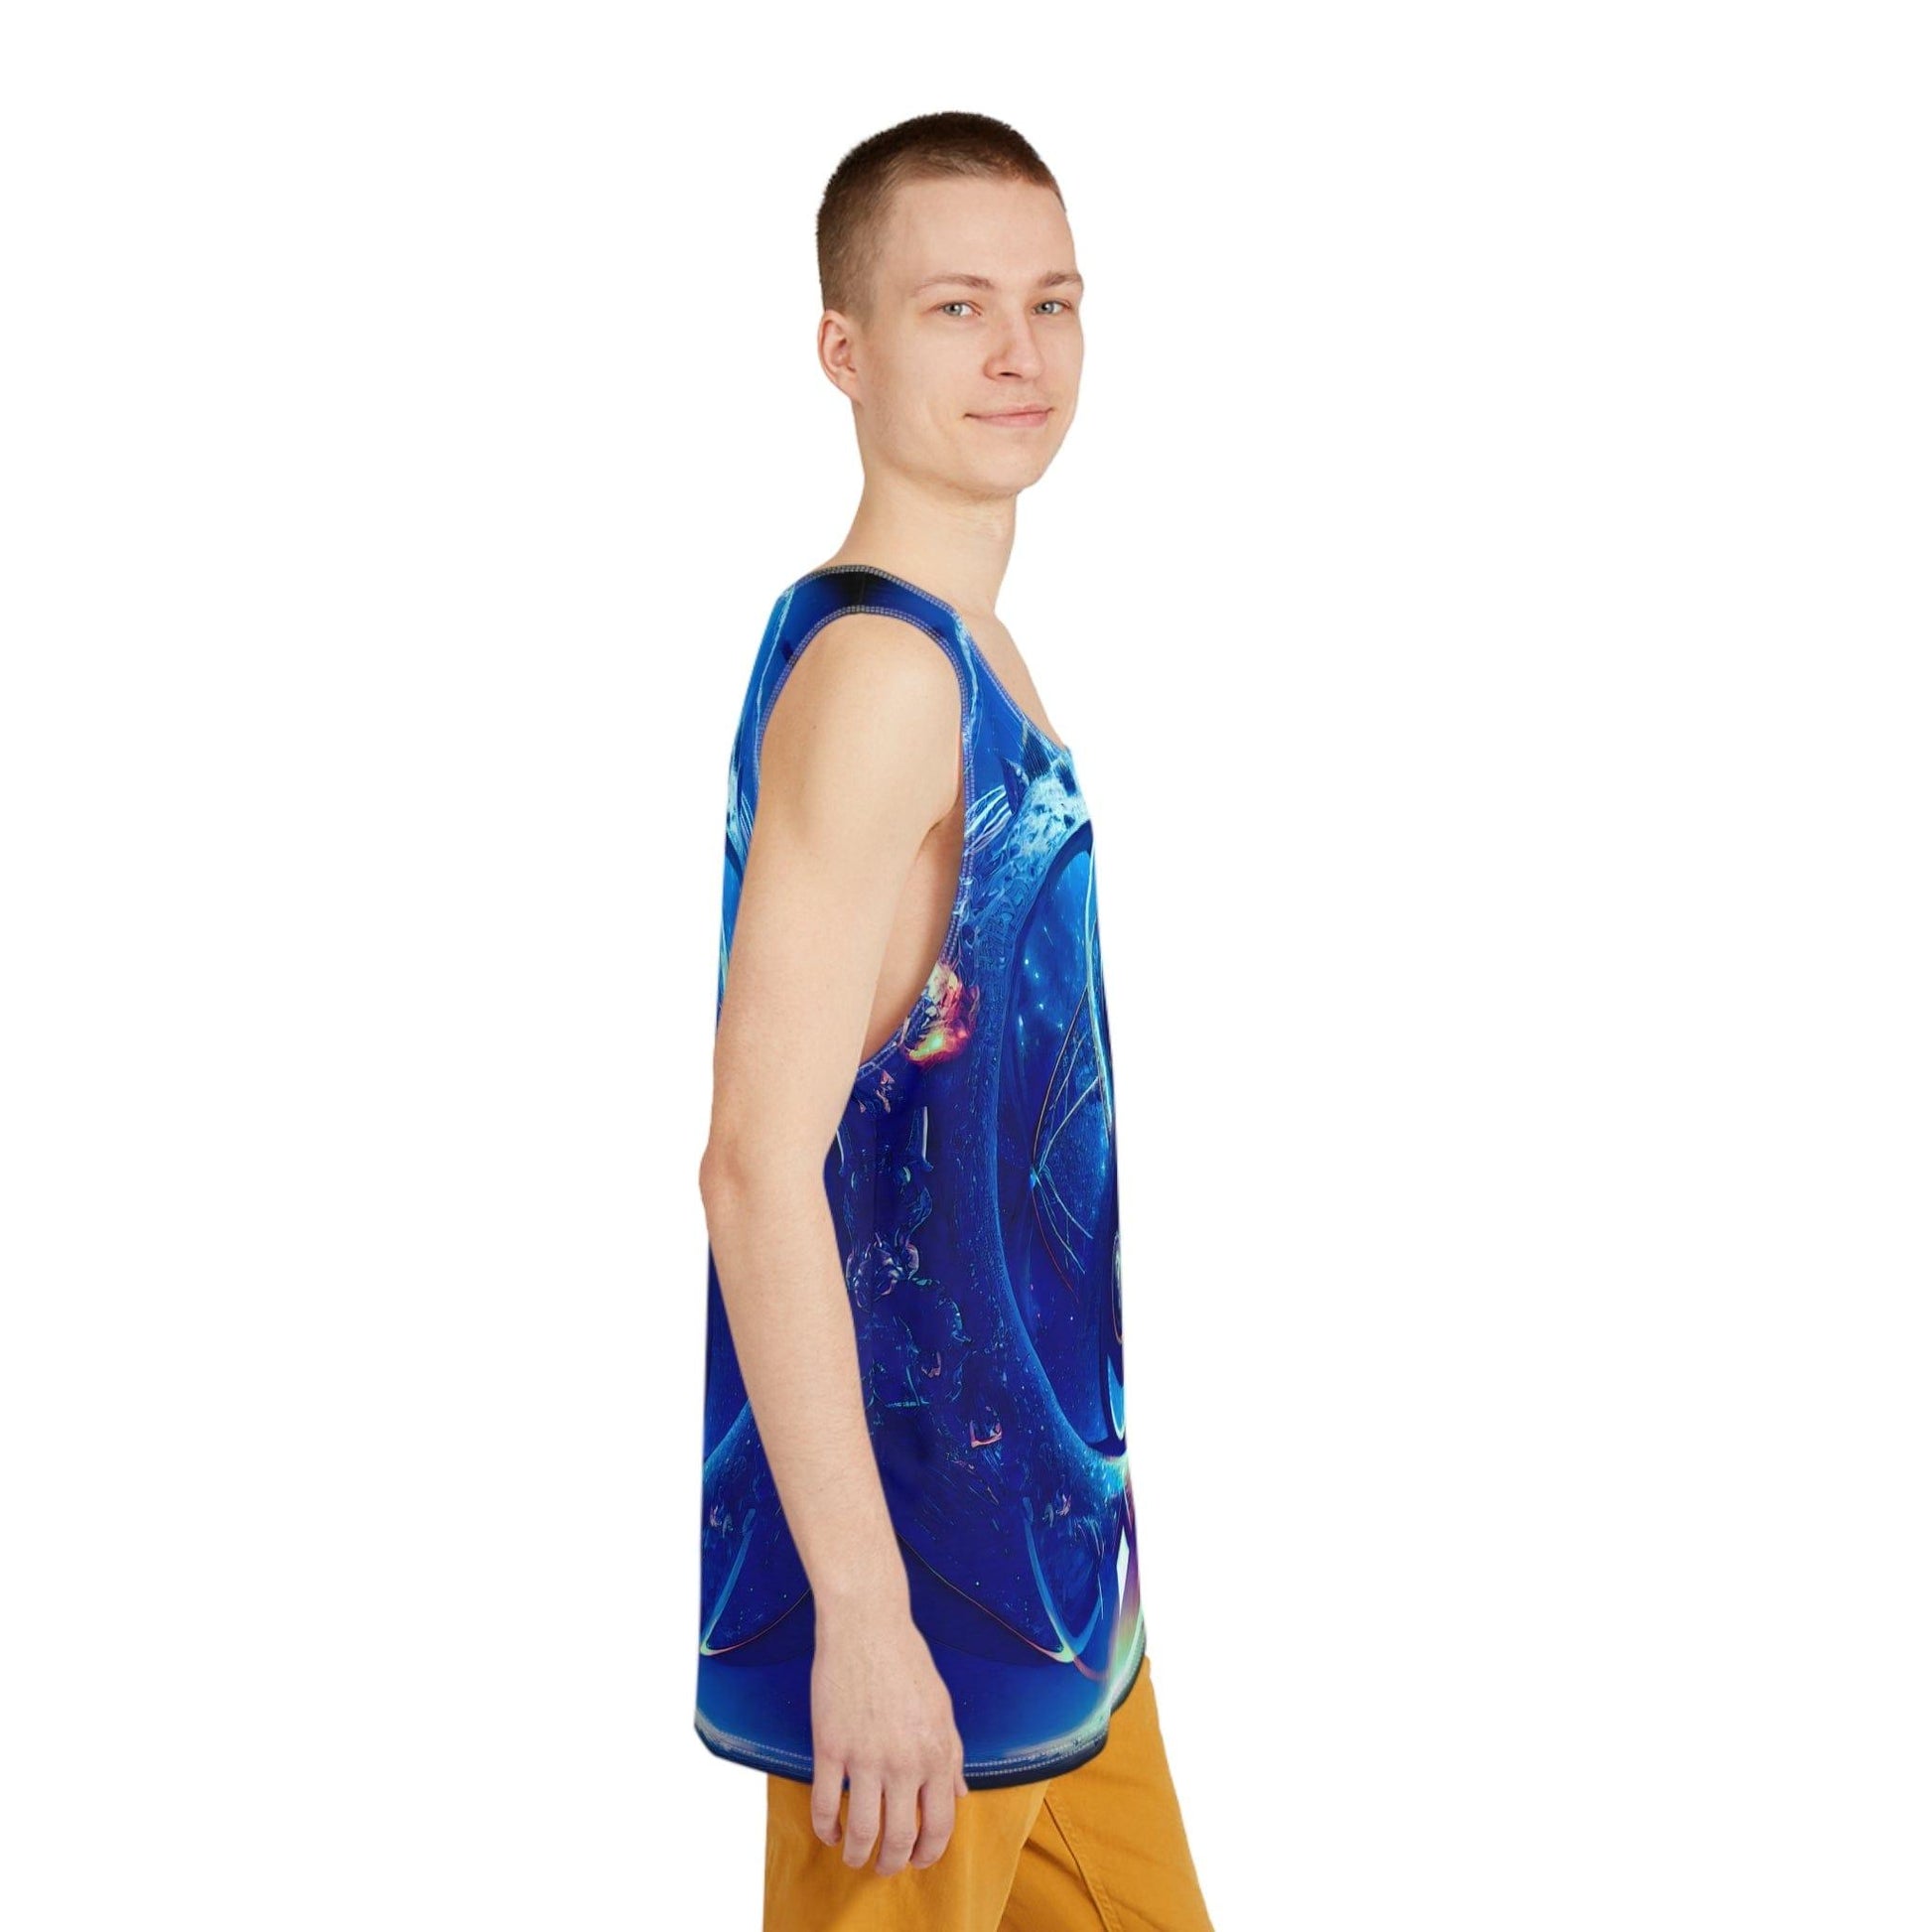 Sacred Geometry Infinity Blue Tank Top Shirt Custom Sublimation Print All-Over Design Tank Top - Stylish Comfort for Gym and Streetwear - Alchemystics.org